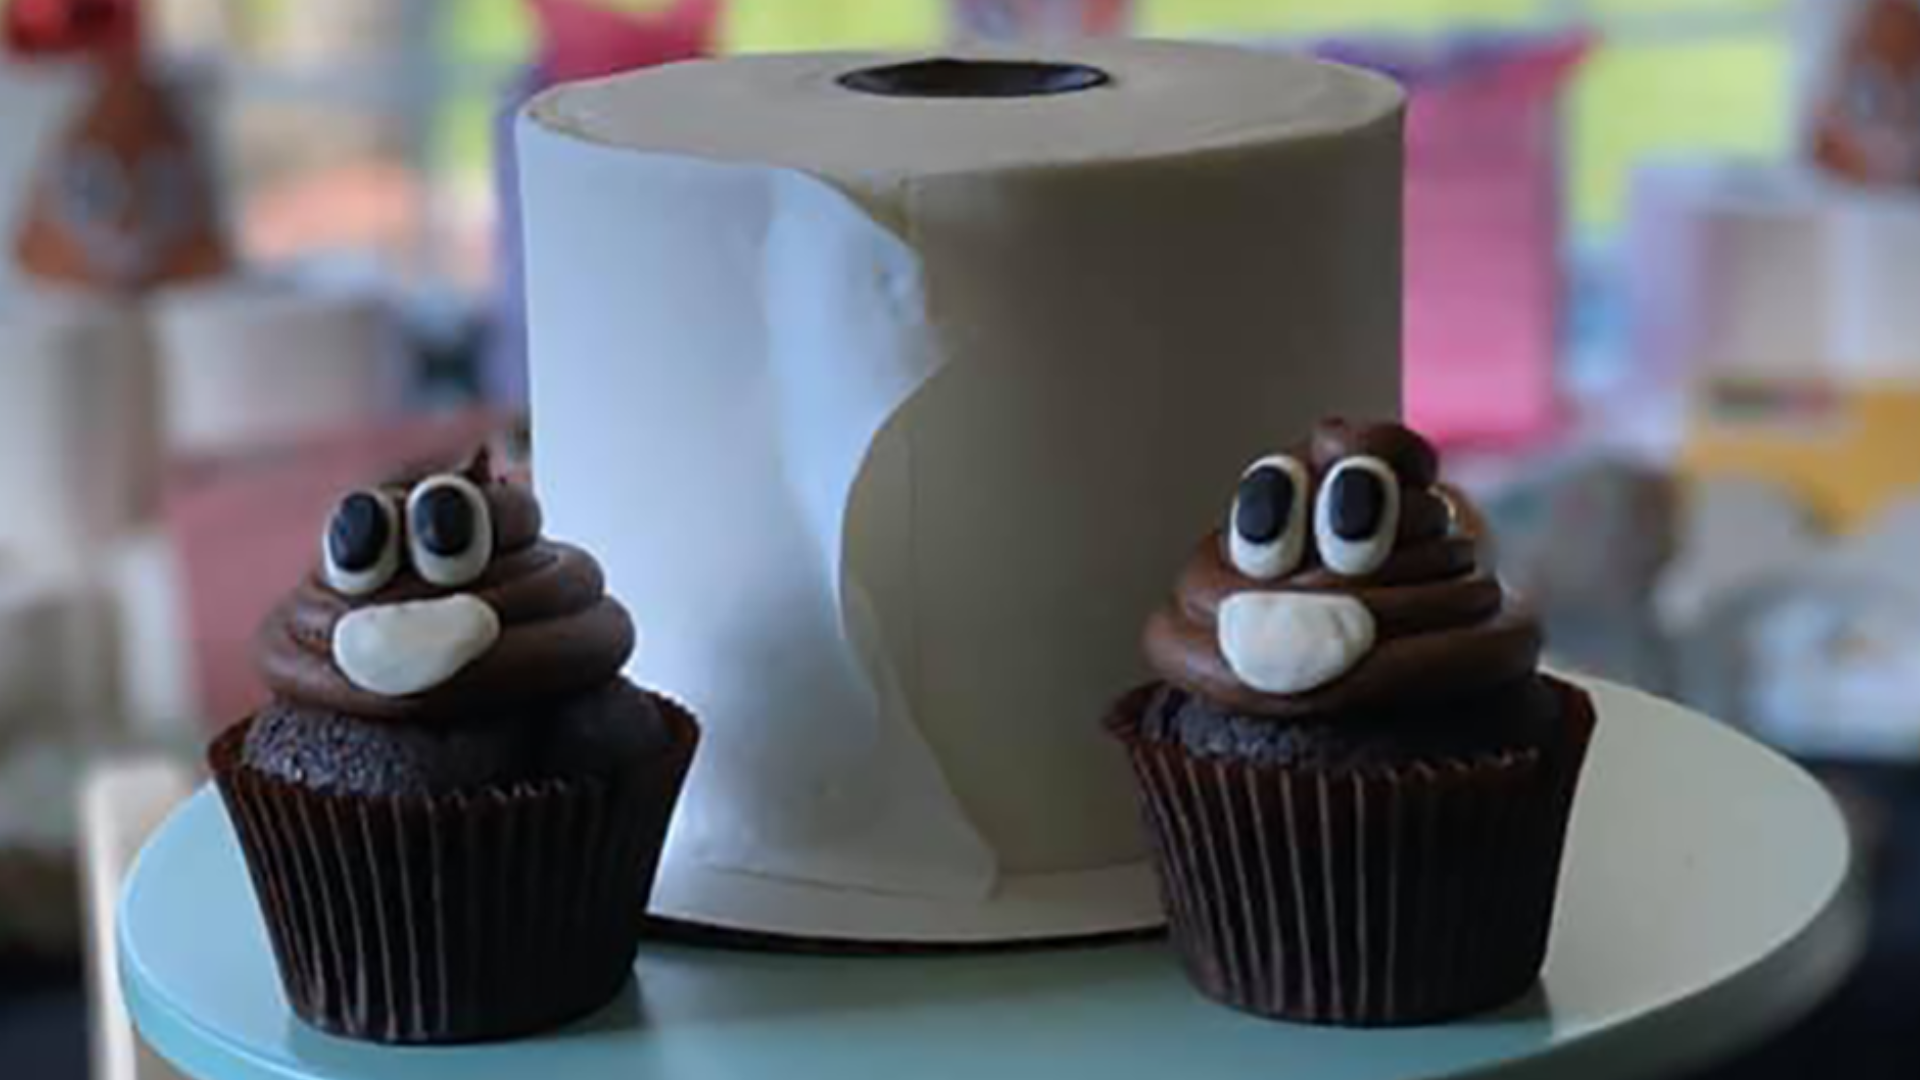 In honor of our collective nation's sudden need for toilet paper, Corina Bakery in Tacoma is now making toilet paper-shaped cakes!